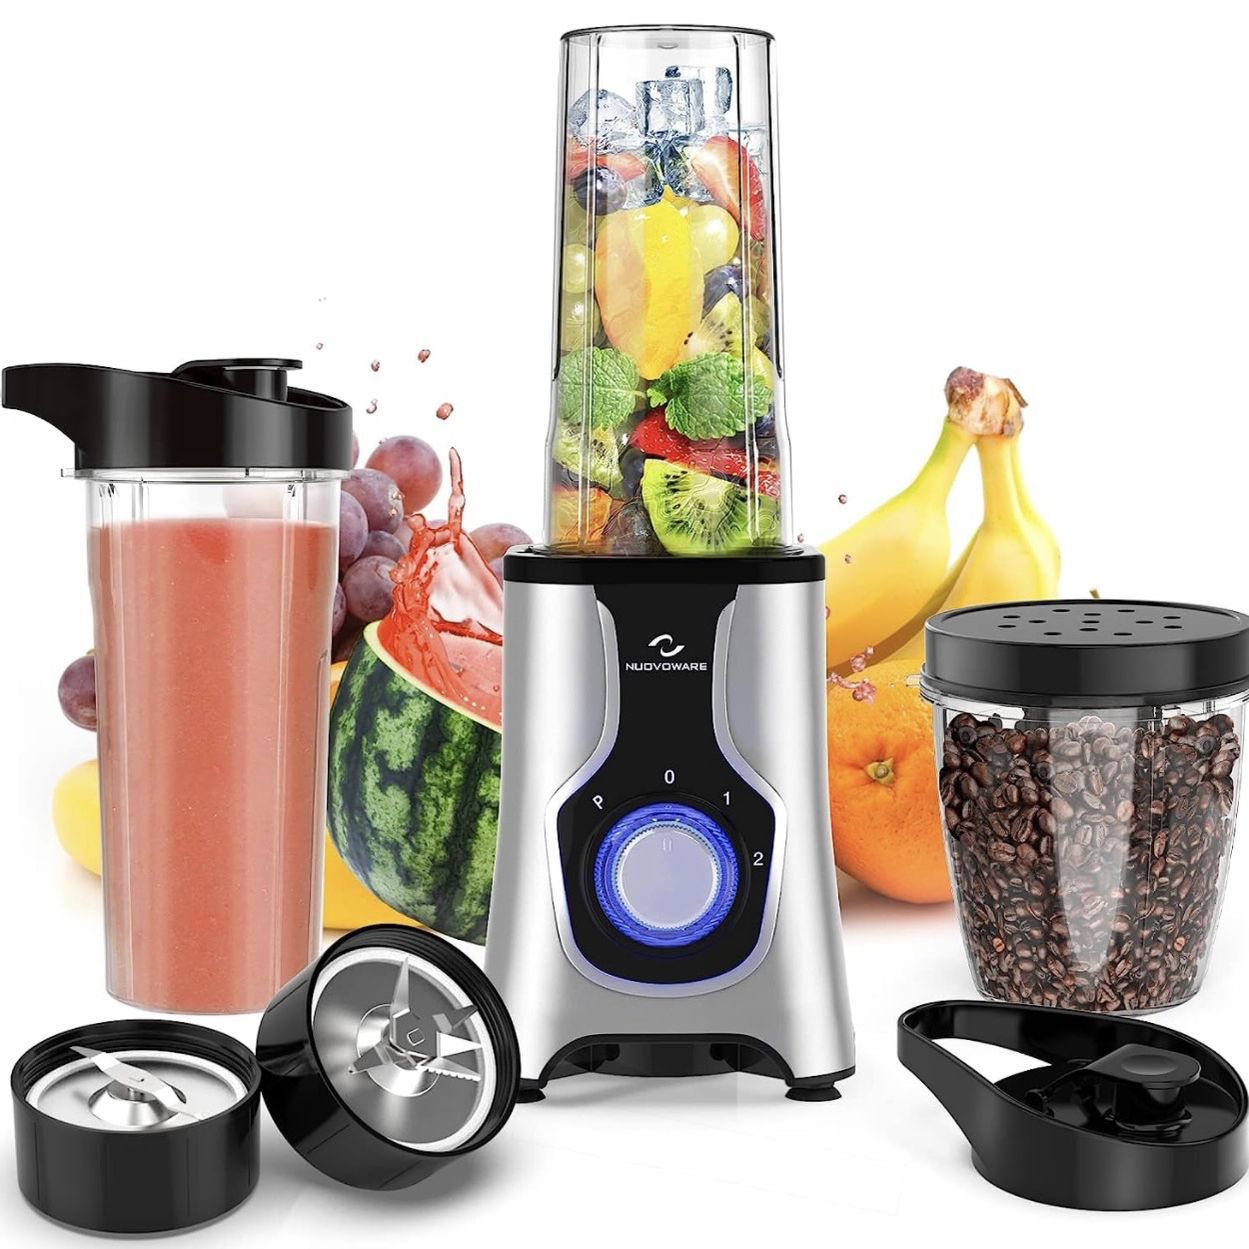 New In Box Parini On-The-Go personal Blender 20 oz For Smoothies/ Fruit  Juices